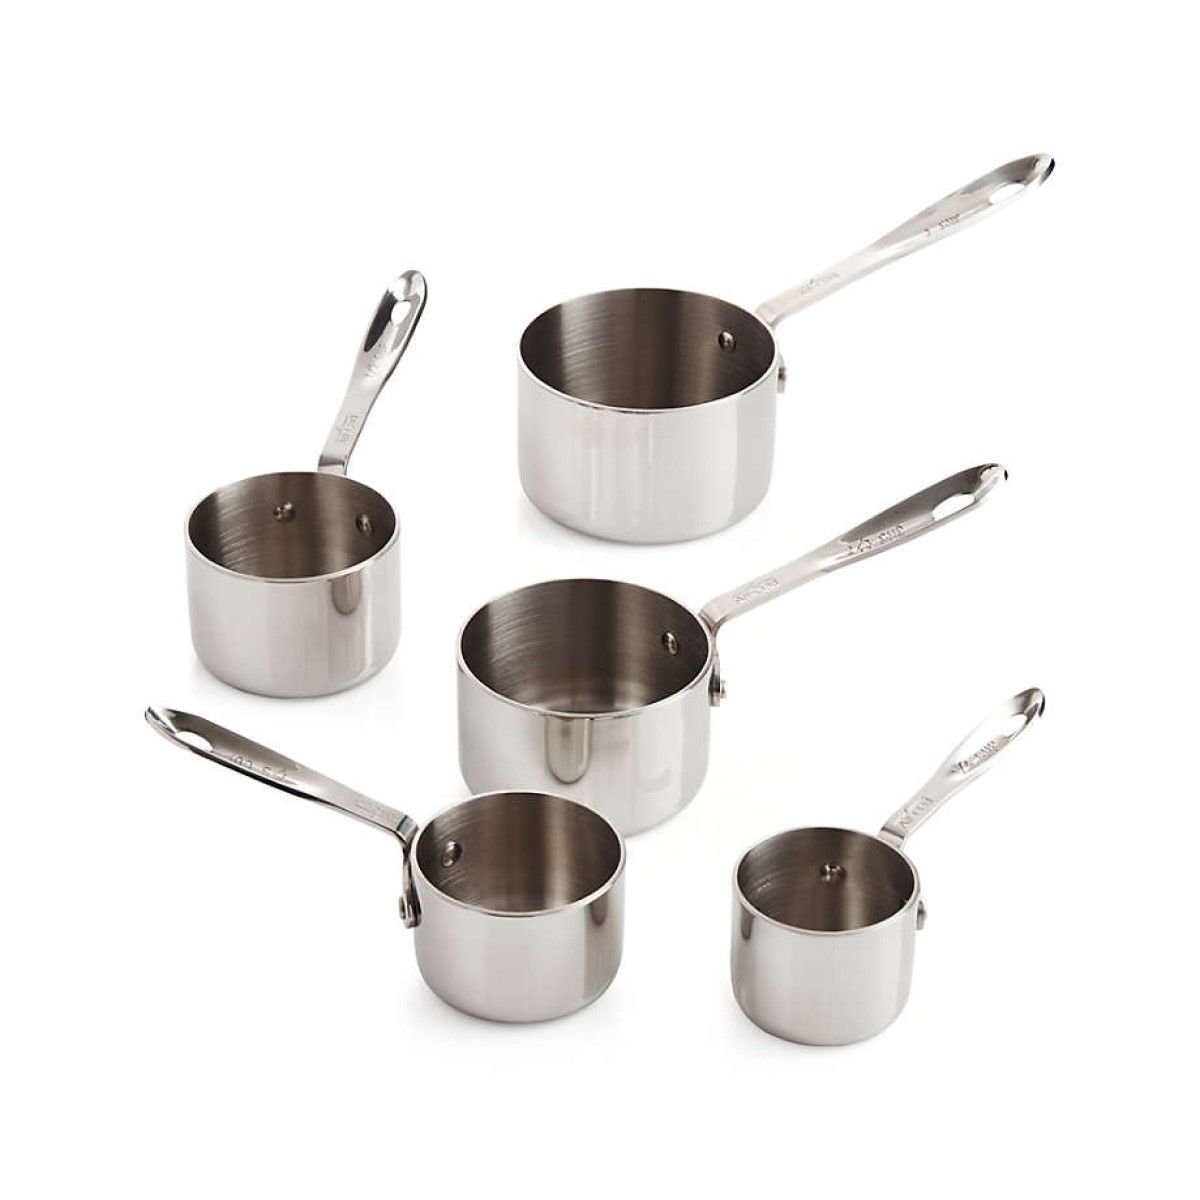 Stainless Steel Measuring Cup Set 59917, All-Clad